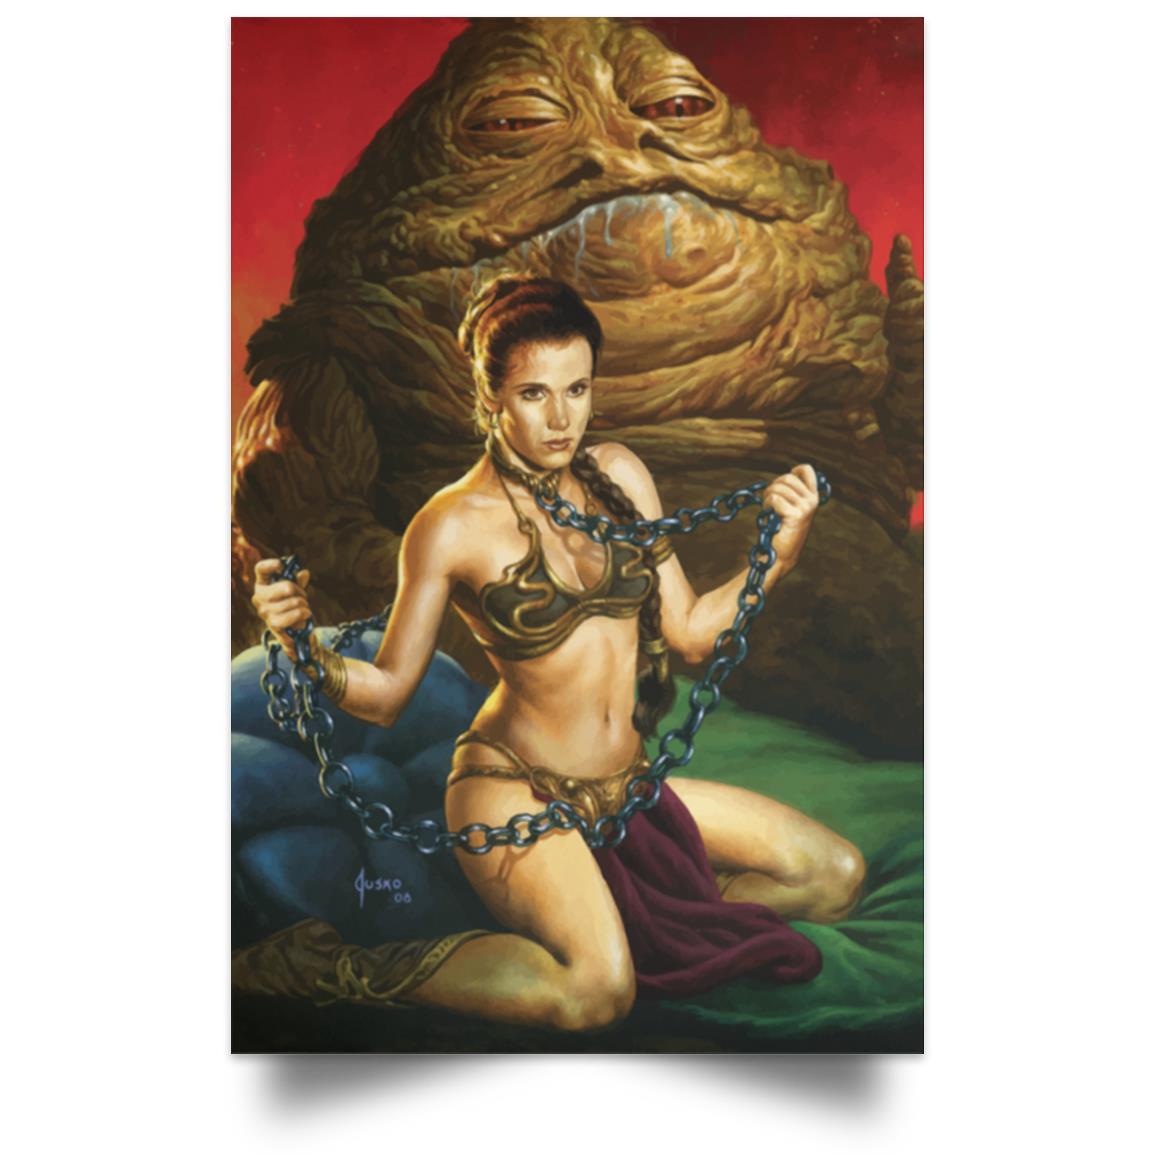 STAR WARS JABBA AND LEIA SLAVE POSTER 1